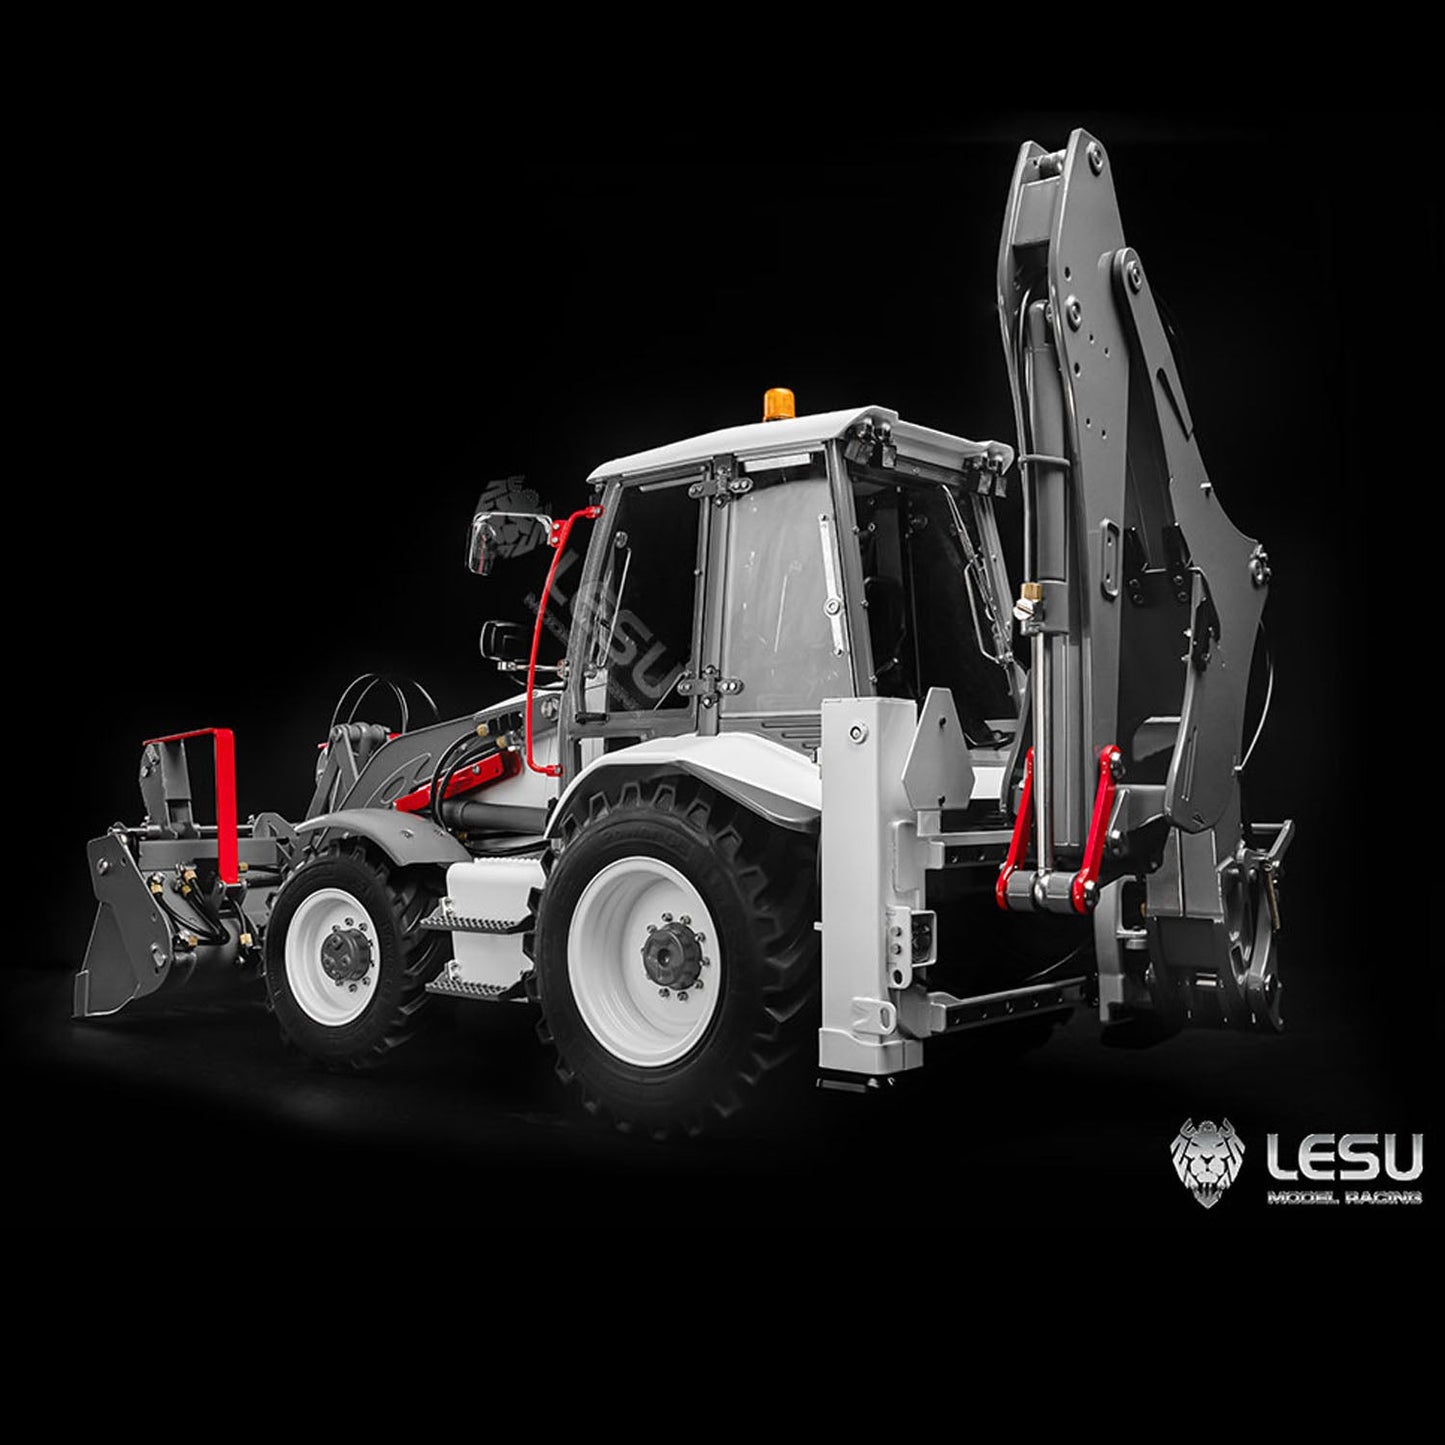 IN STOCK LESU 1/14 RC Hydraulic Equipment Remote Controlled Backhoe Loader AOUE BL71 2 in 1 Excavator Model PL18EVLite Painted Assembled teshulianjie